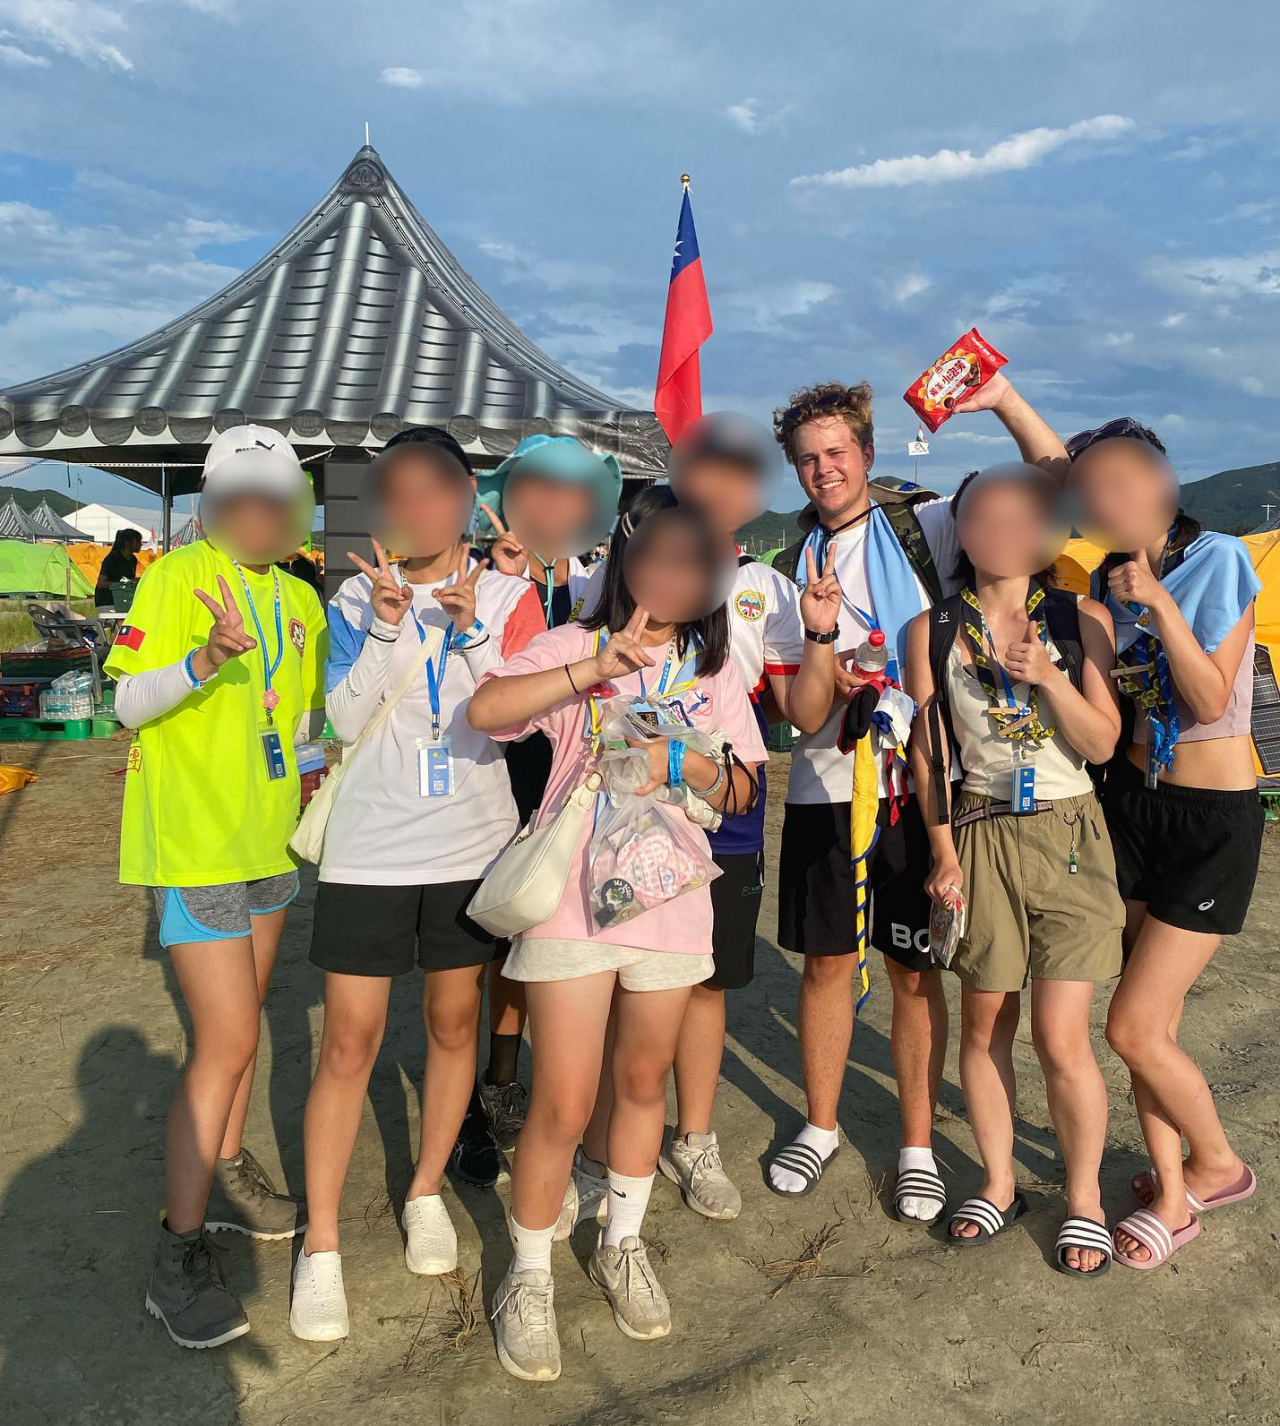 Herman Lind, a Swedish Scout, smiles for a photo with Taiwanese Scouts at the Saemangeum Jamboree campsite. (Courtesy of Herman Lind)